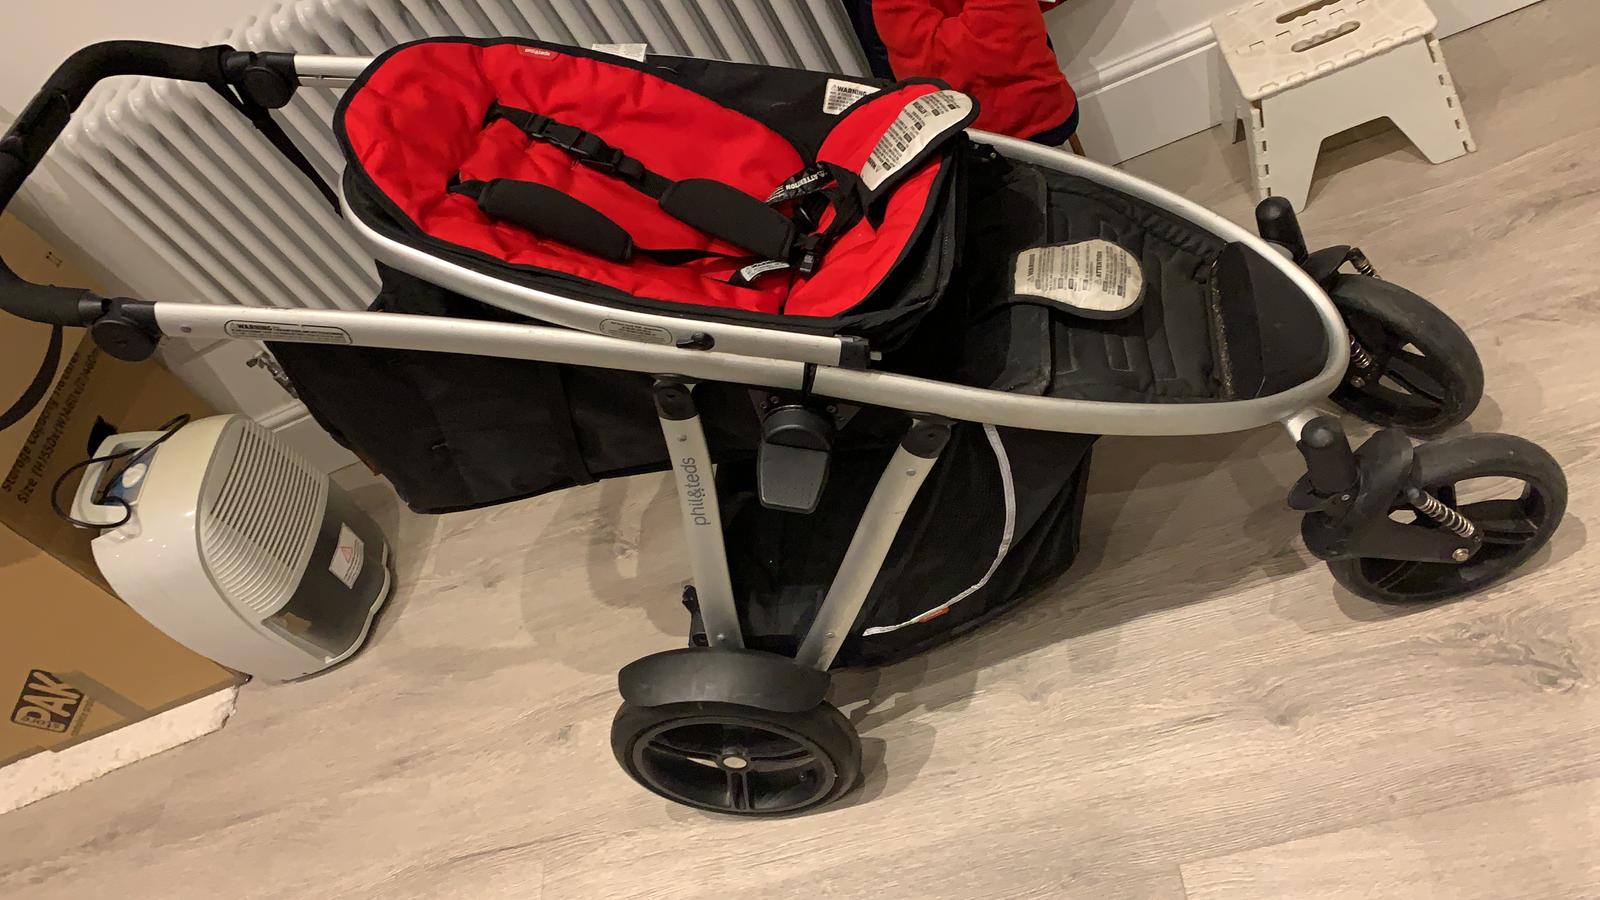 phil and teds double buggy for sale